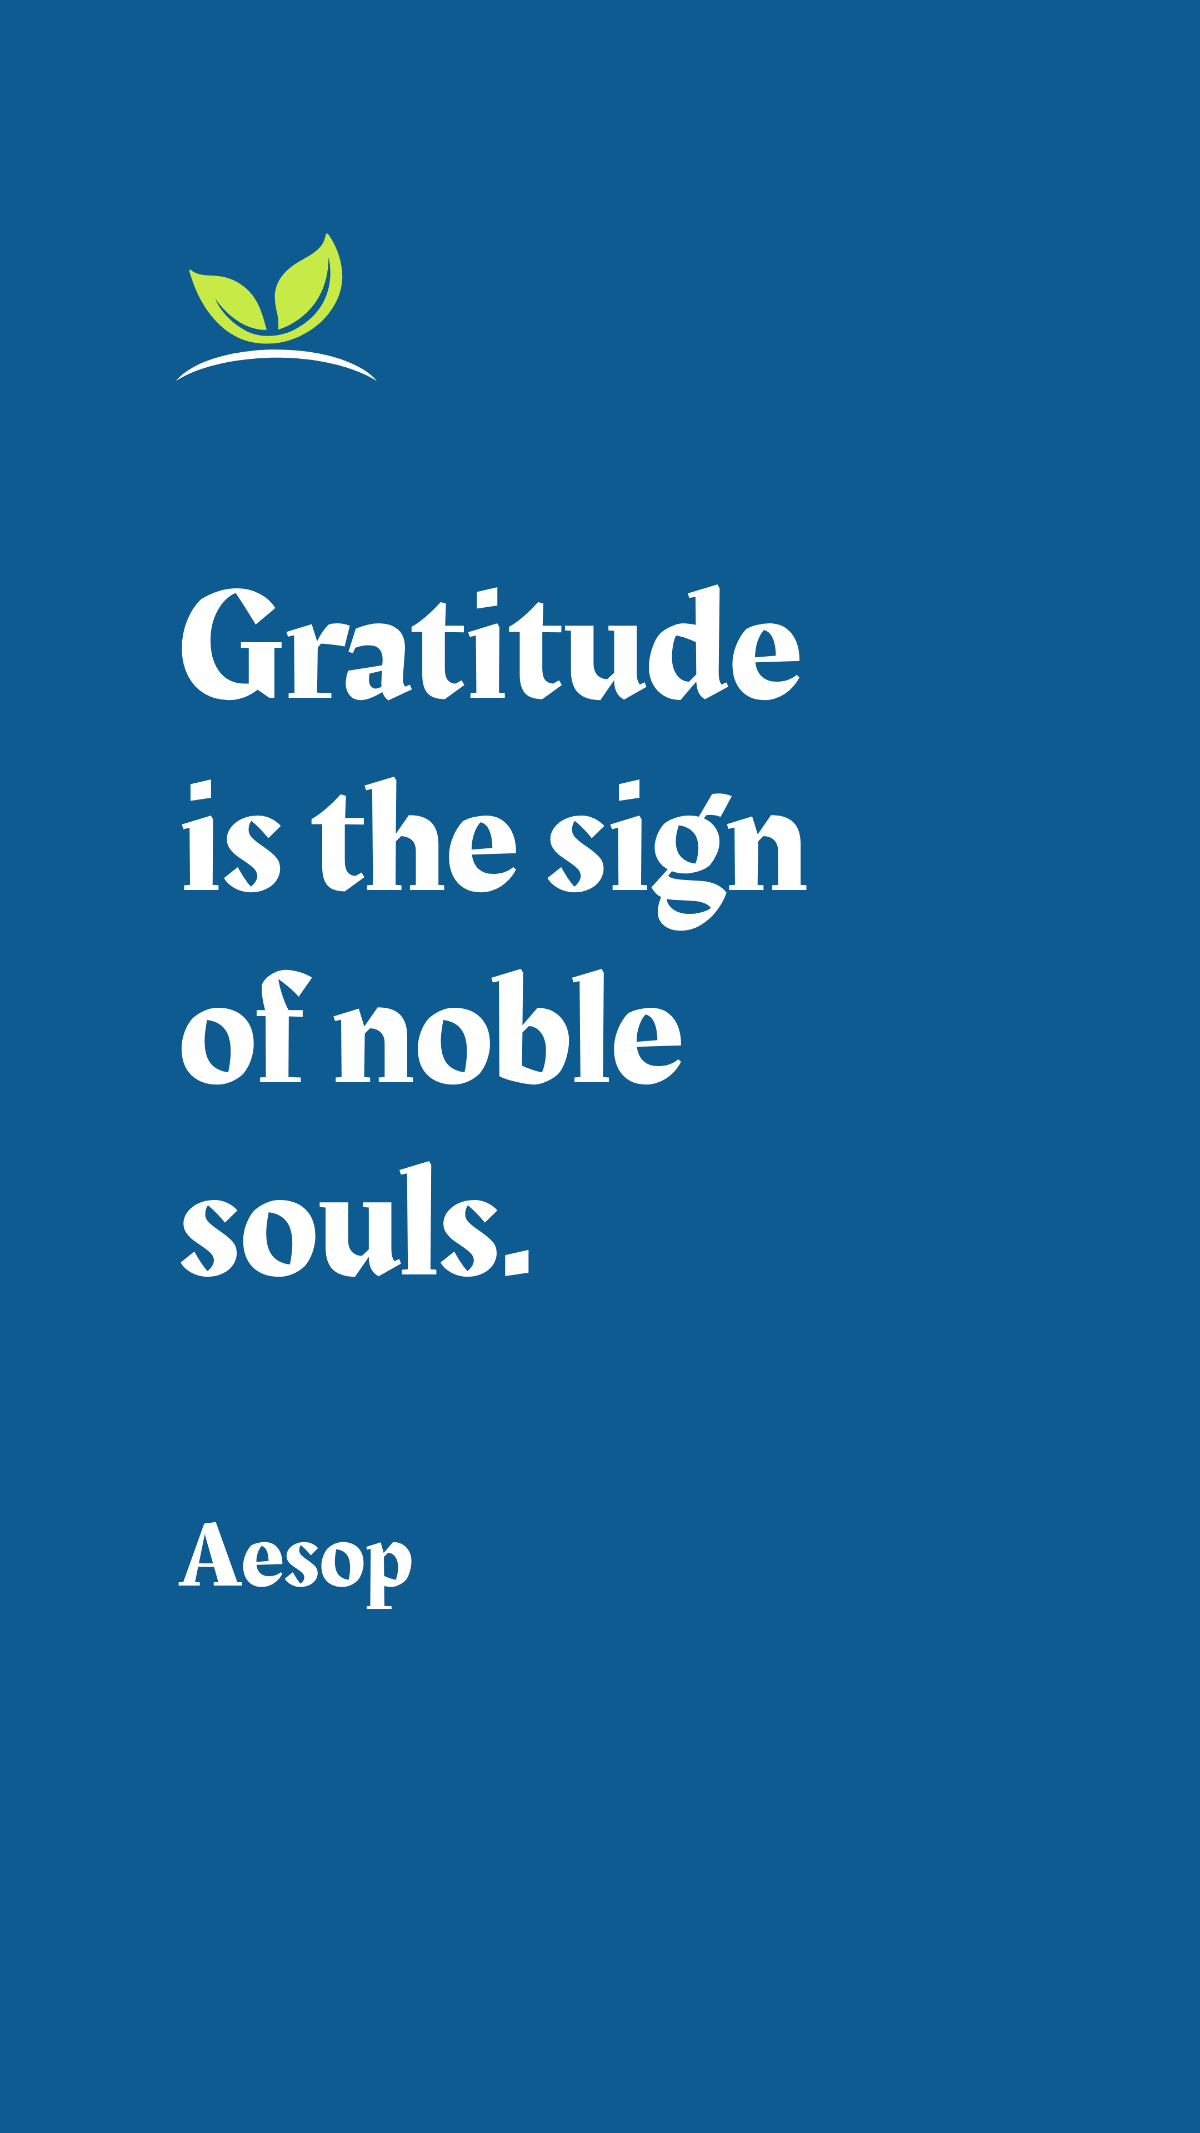 Aesop - Gratitude is the sign of noble souls. Template